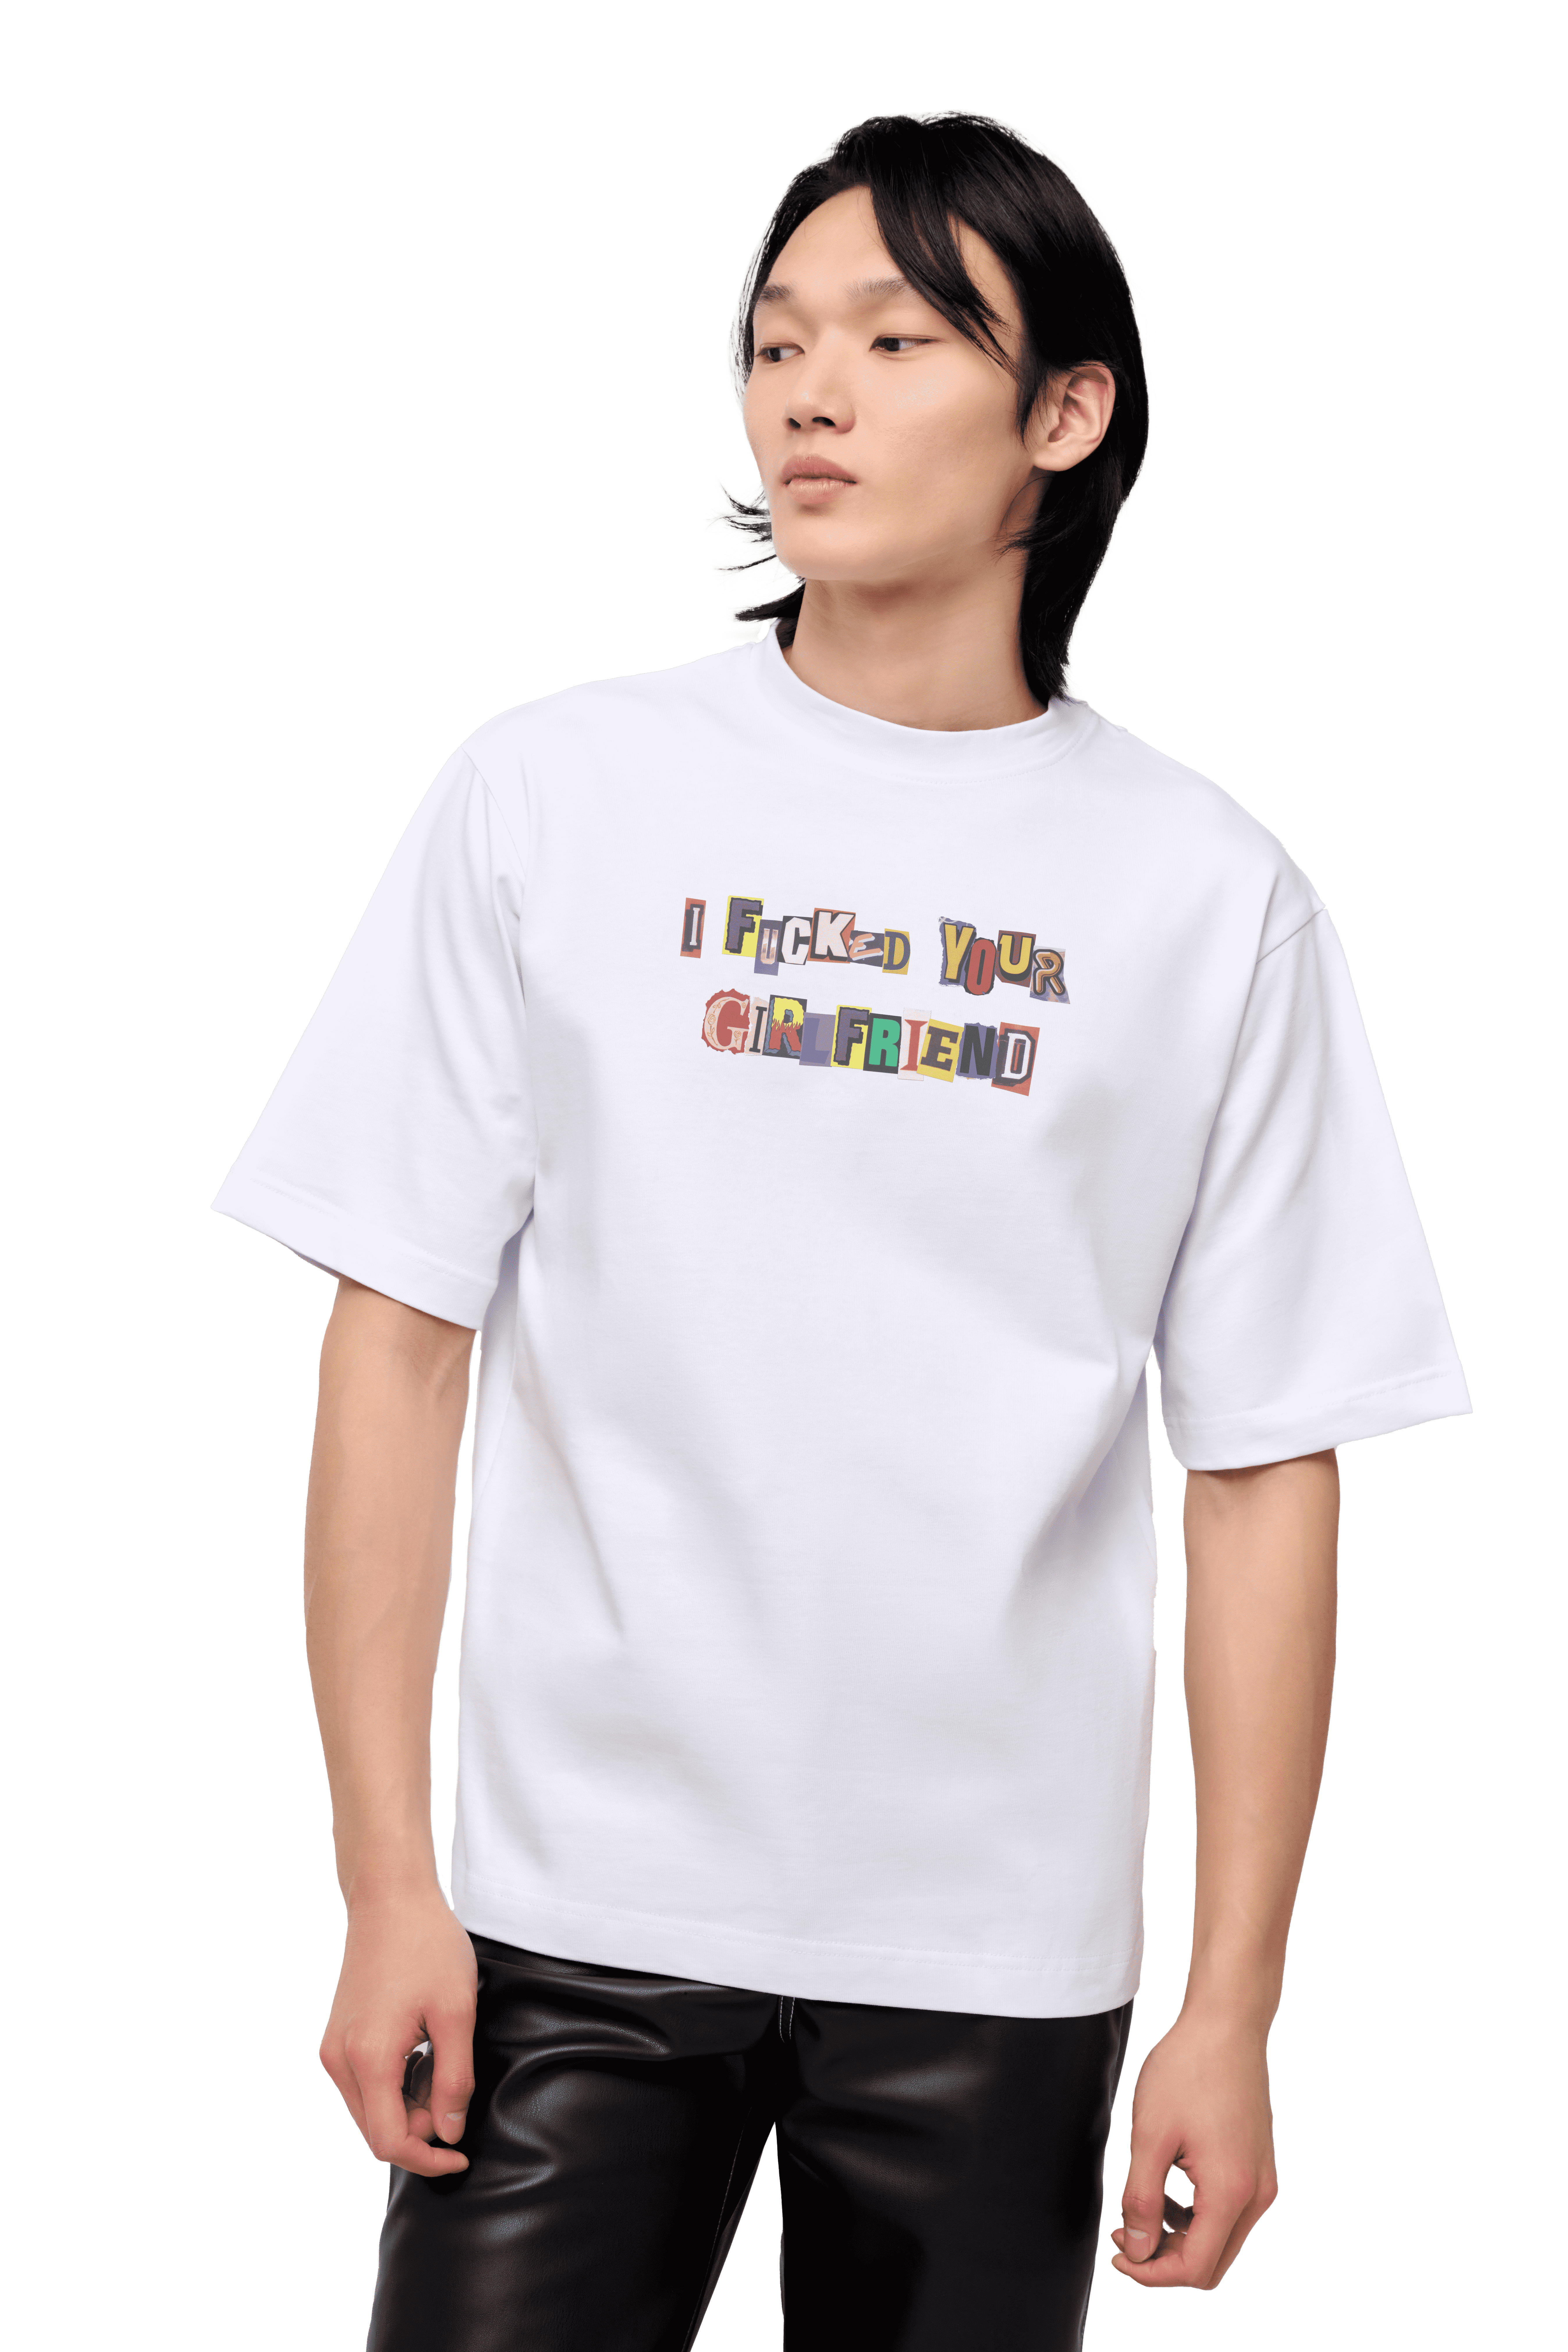 I Fucked Your Girlfriend T-Shirt